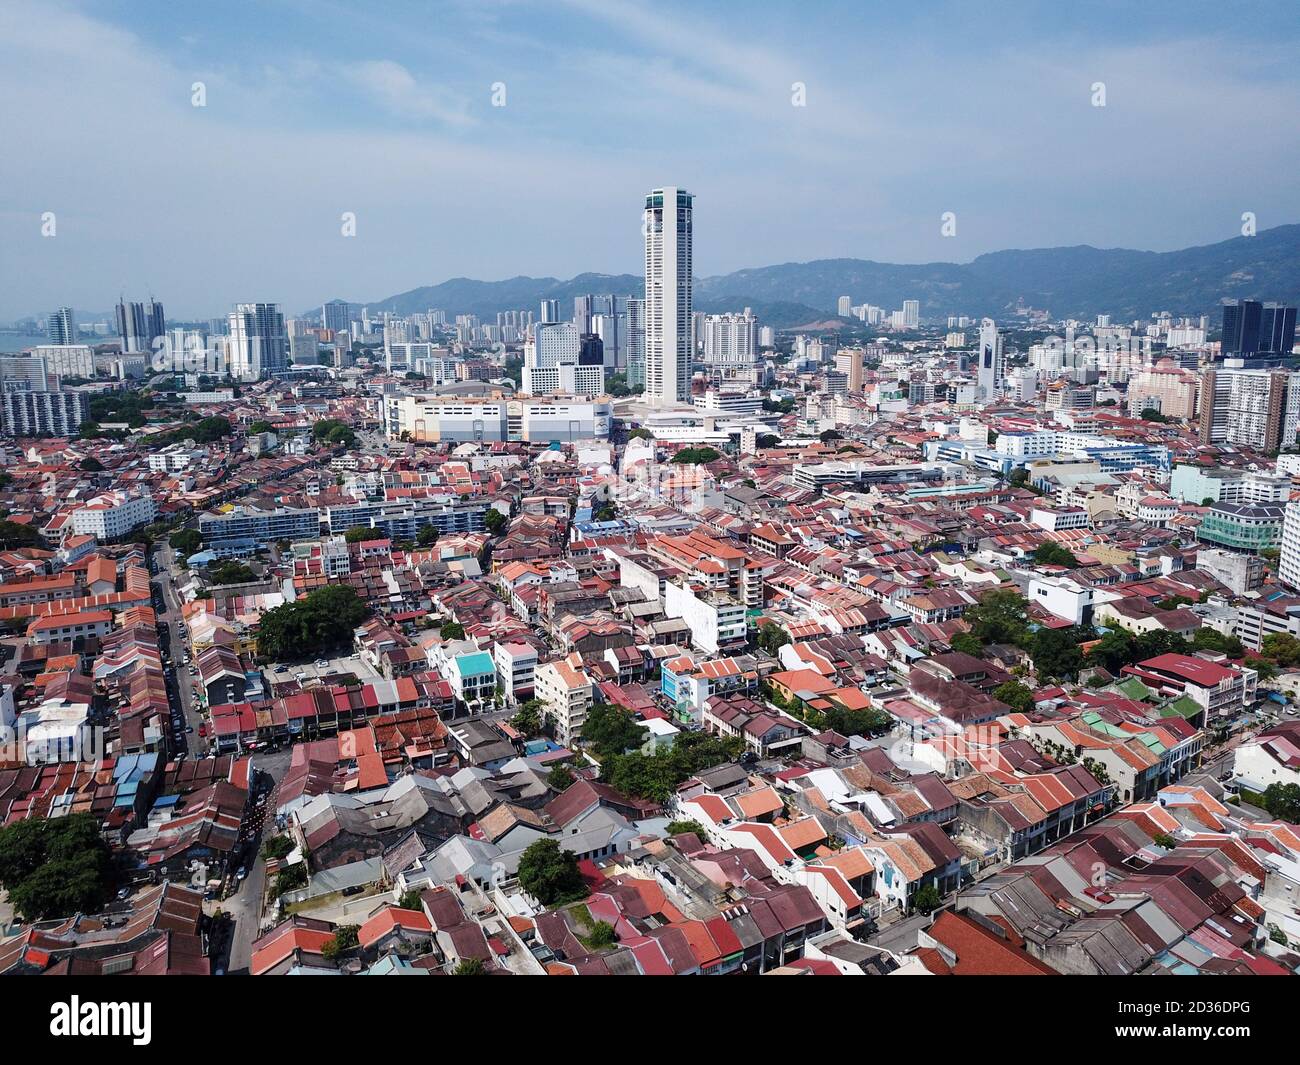 Georgetown, Penang/Malaysia - Mar 17 2020: Georgetown heritage city in blue sky. Stock Photo